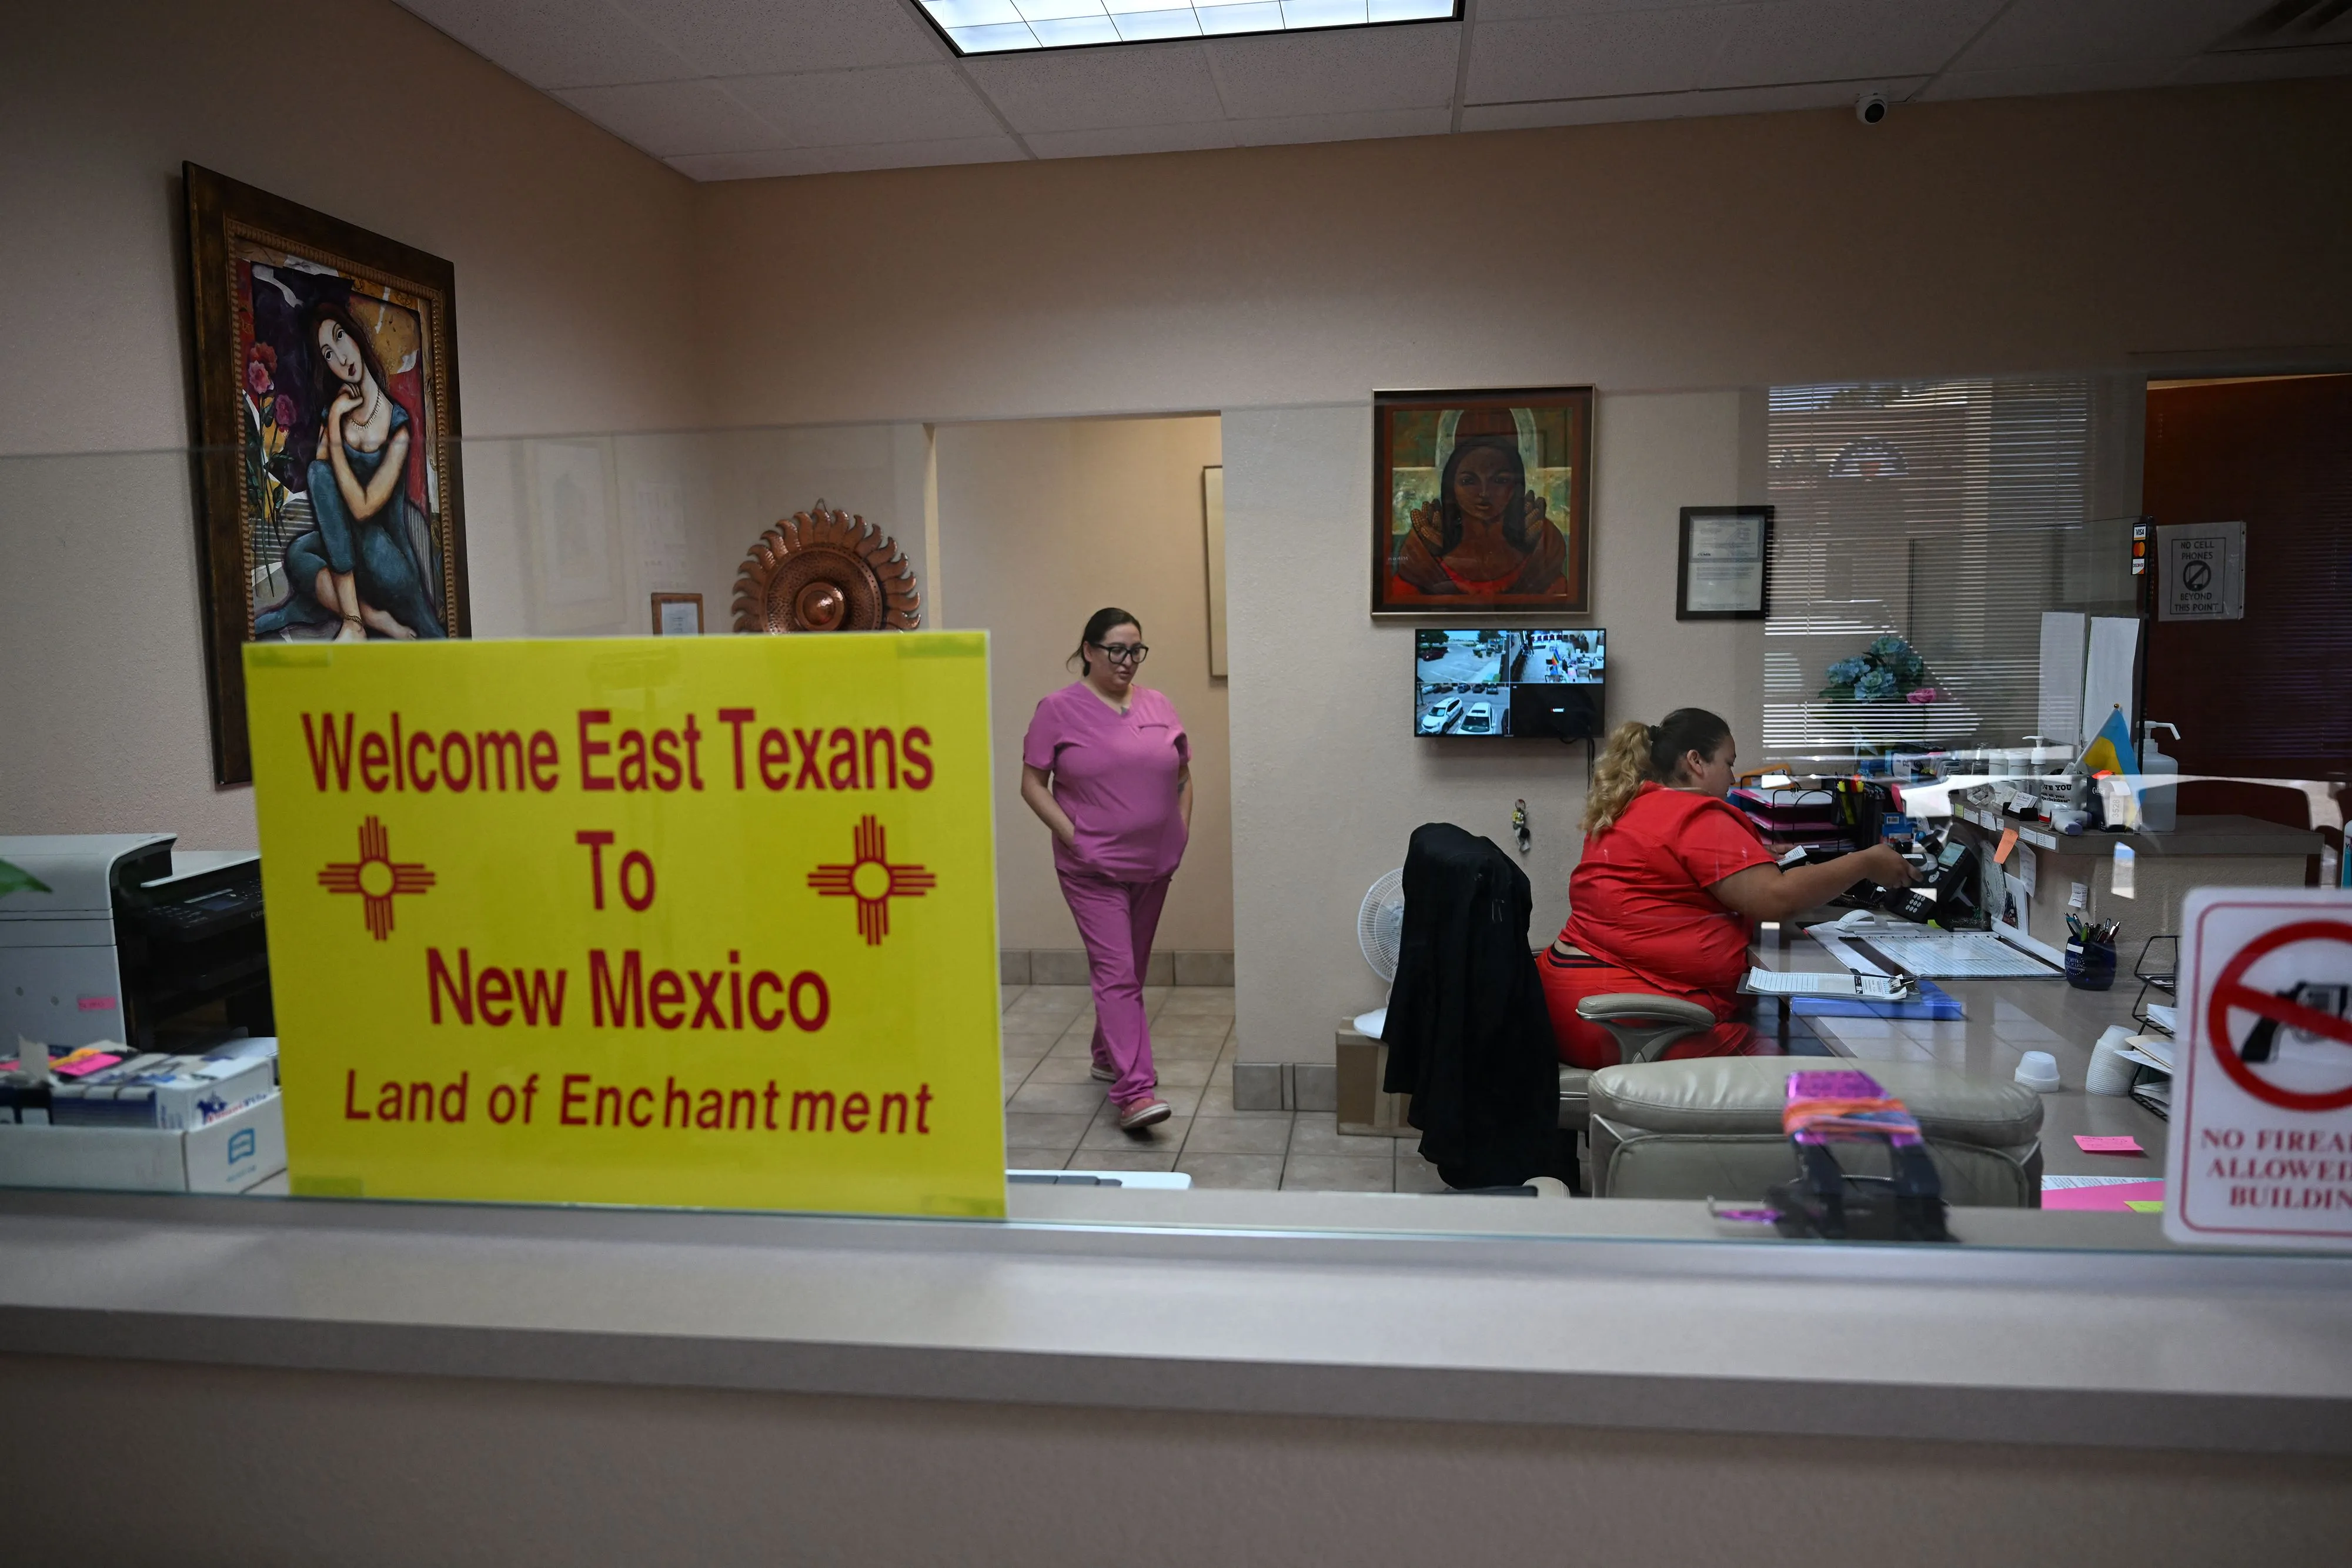 A sign welcoming patients from East Texas is displayed in the waiting area of the Women's Reproductive Clinic, which provides legal medication abortion services, in Santa Teresa, New Mexico, on June 15, 2022.?w=200&h=150